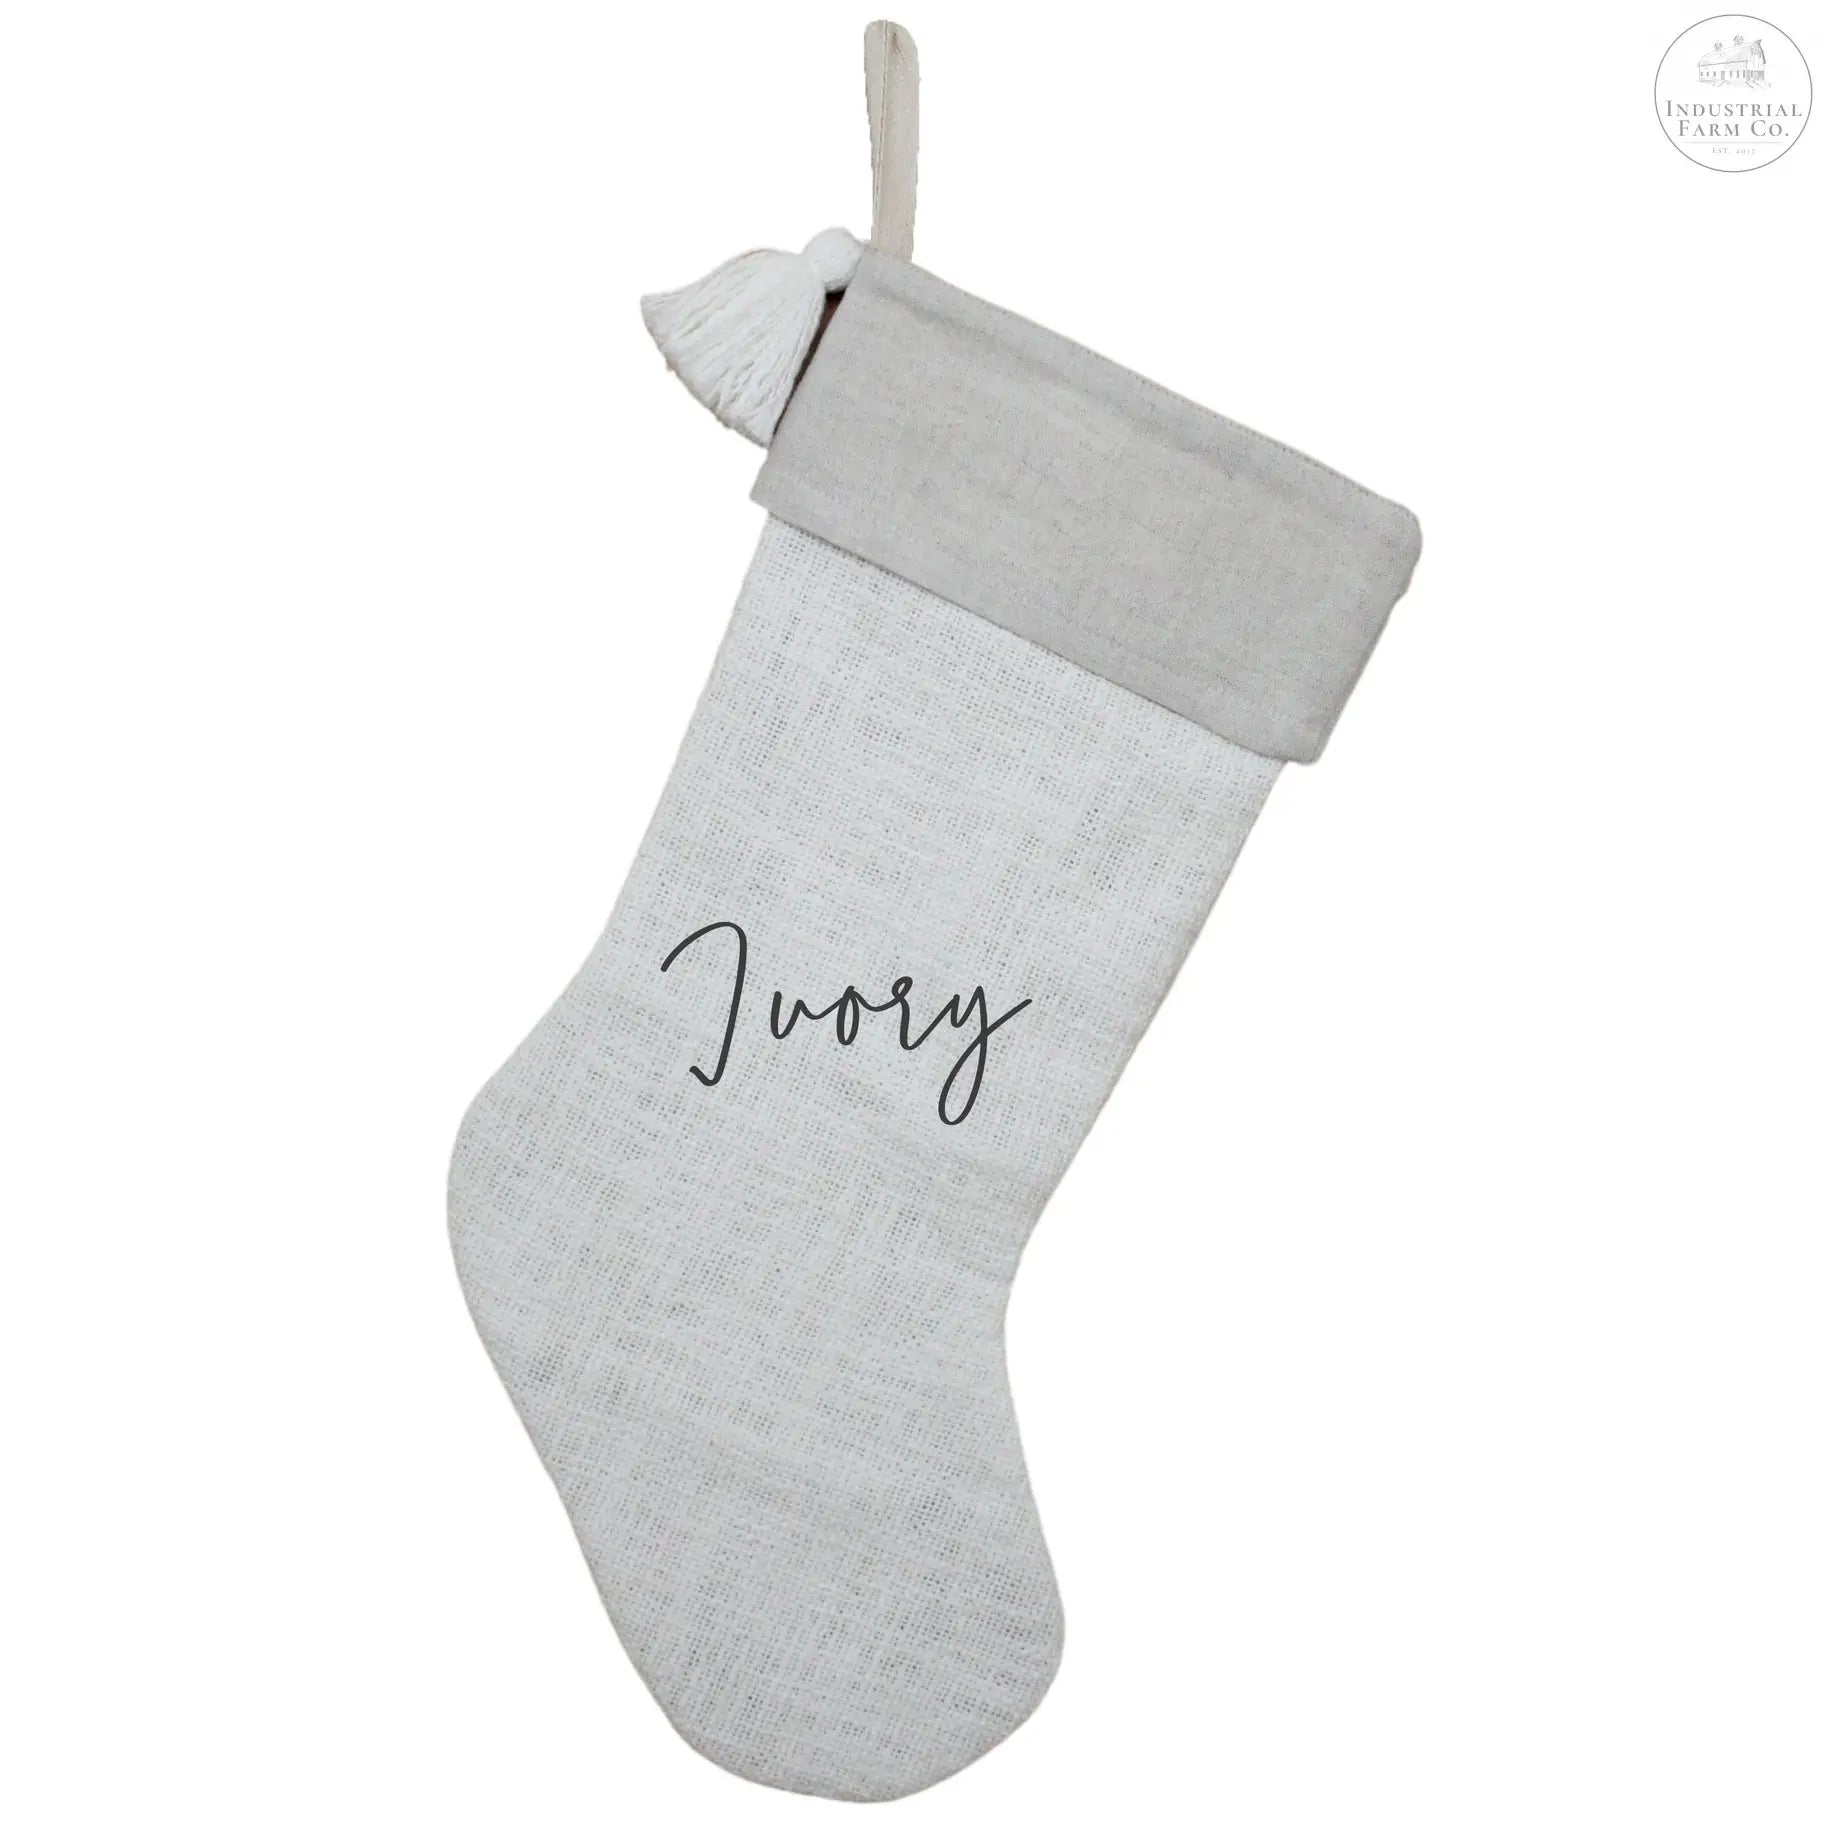 The Farmhouse Handwoven Stocking  Ivory   | Industrial Farm Co